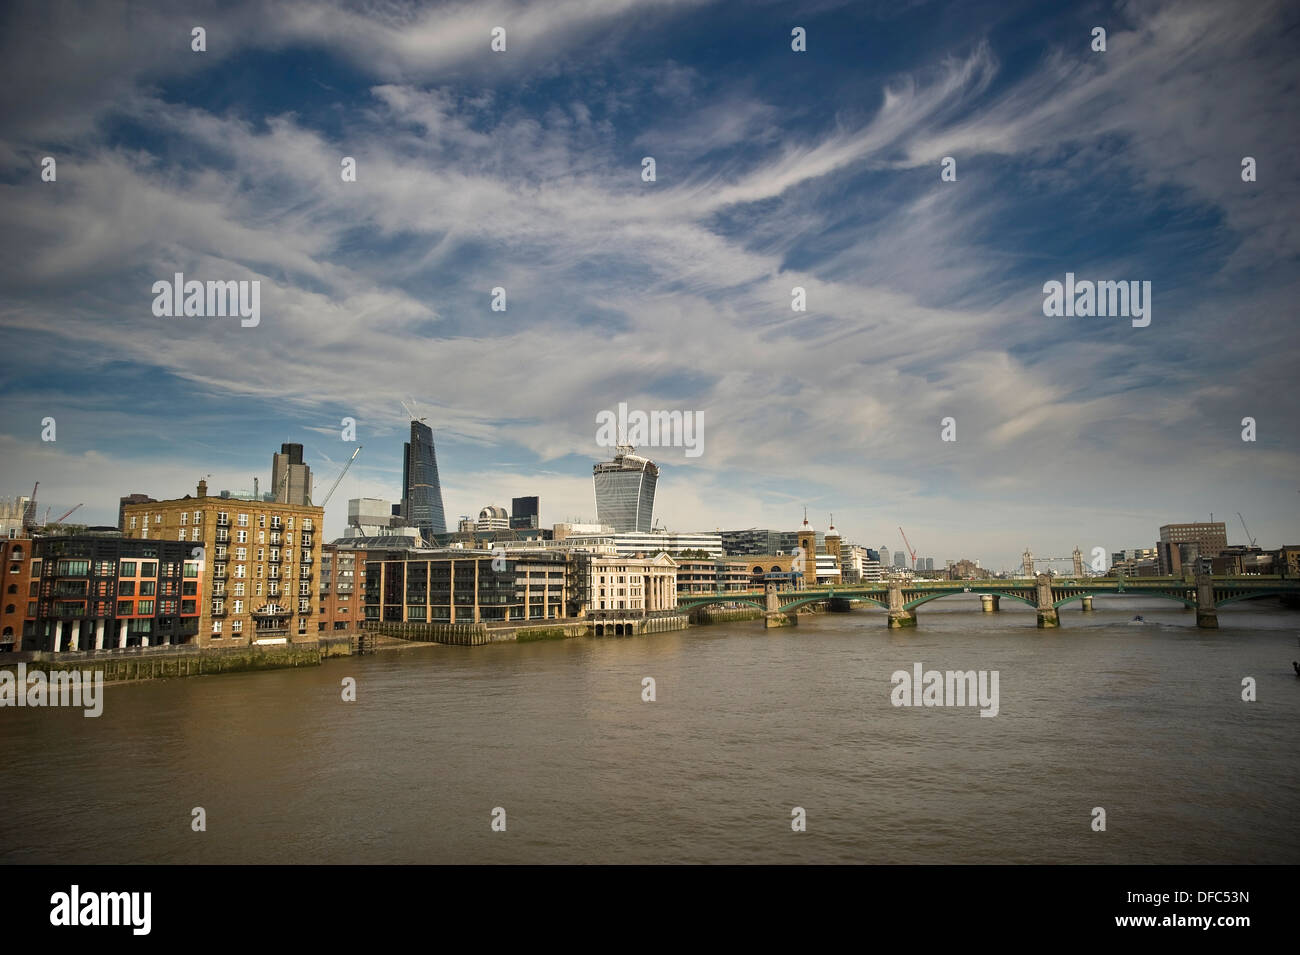 View along the River Thames from the Millennium Bridge, London, UK Stock Photo